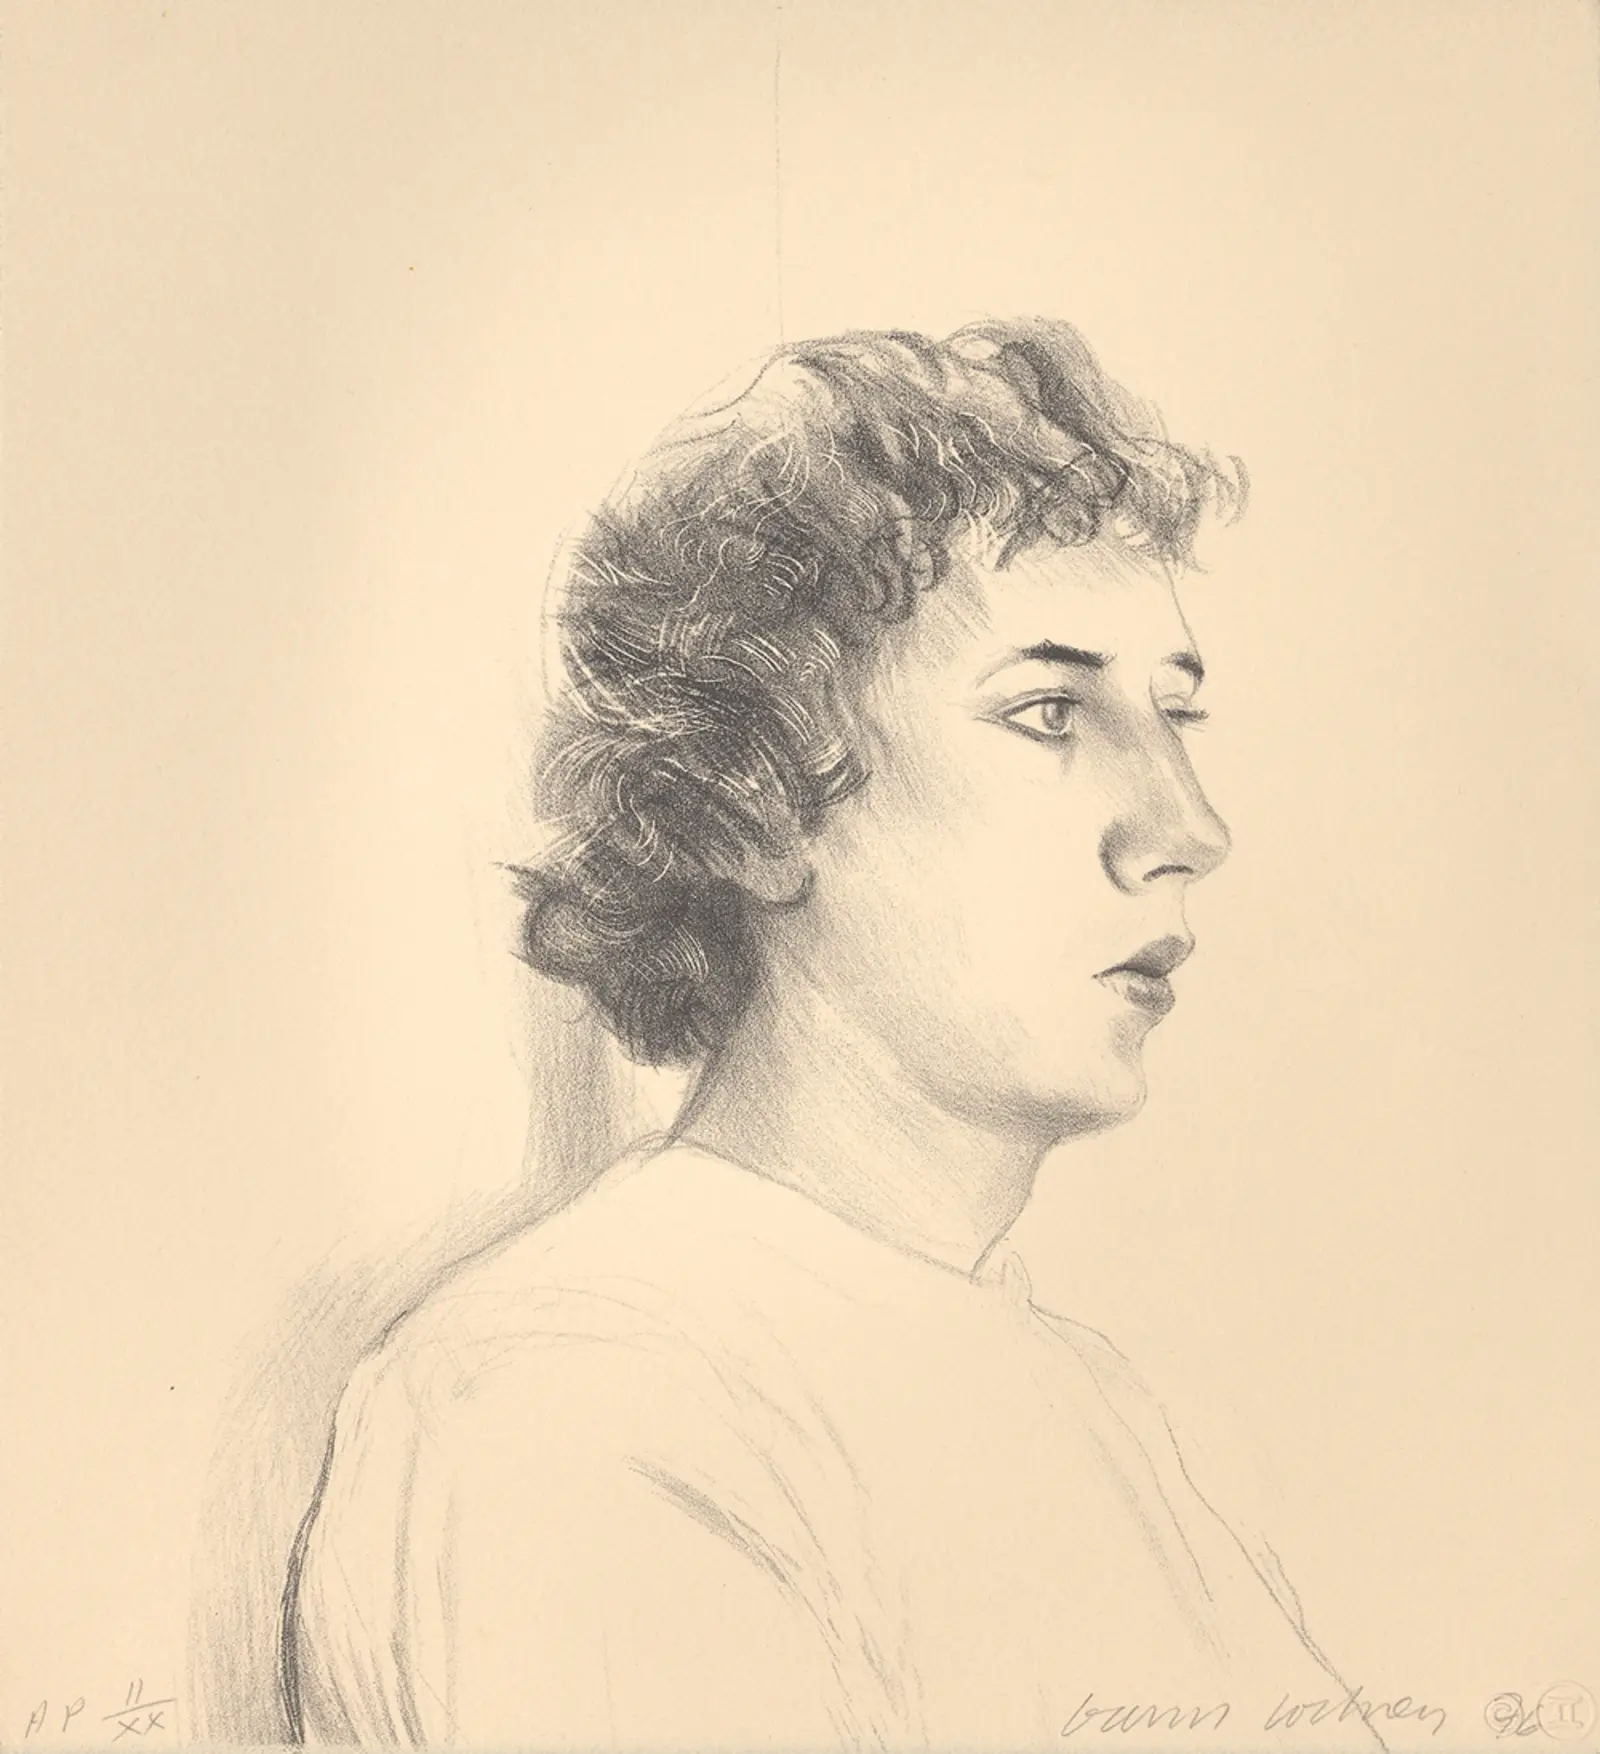 A lithograph of a person looking away from the viewer.